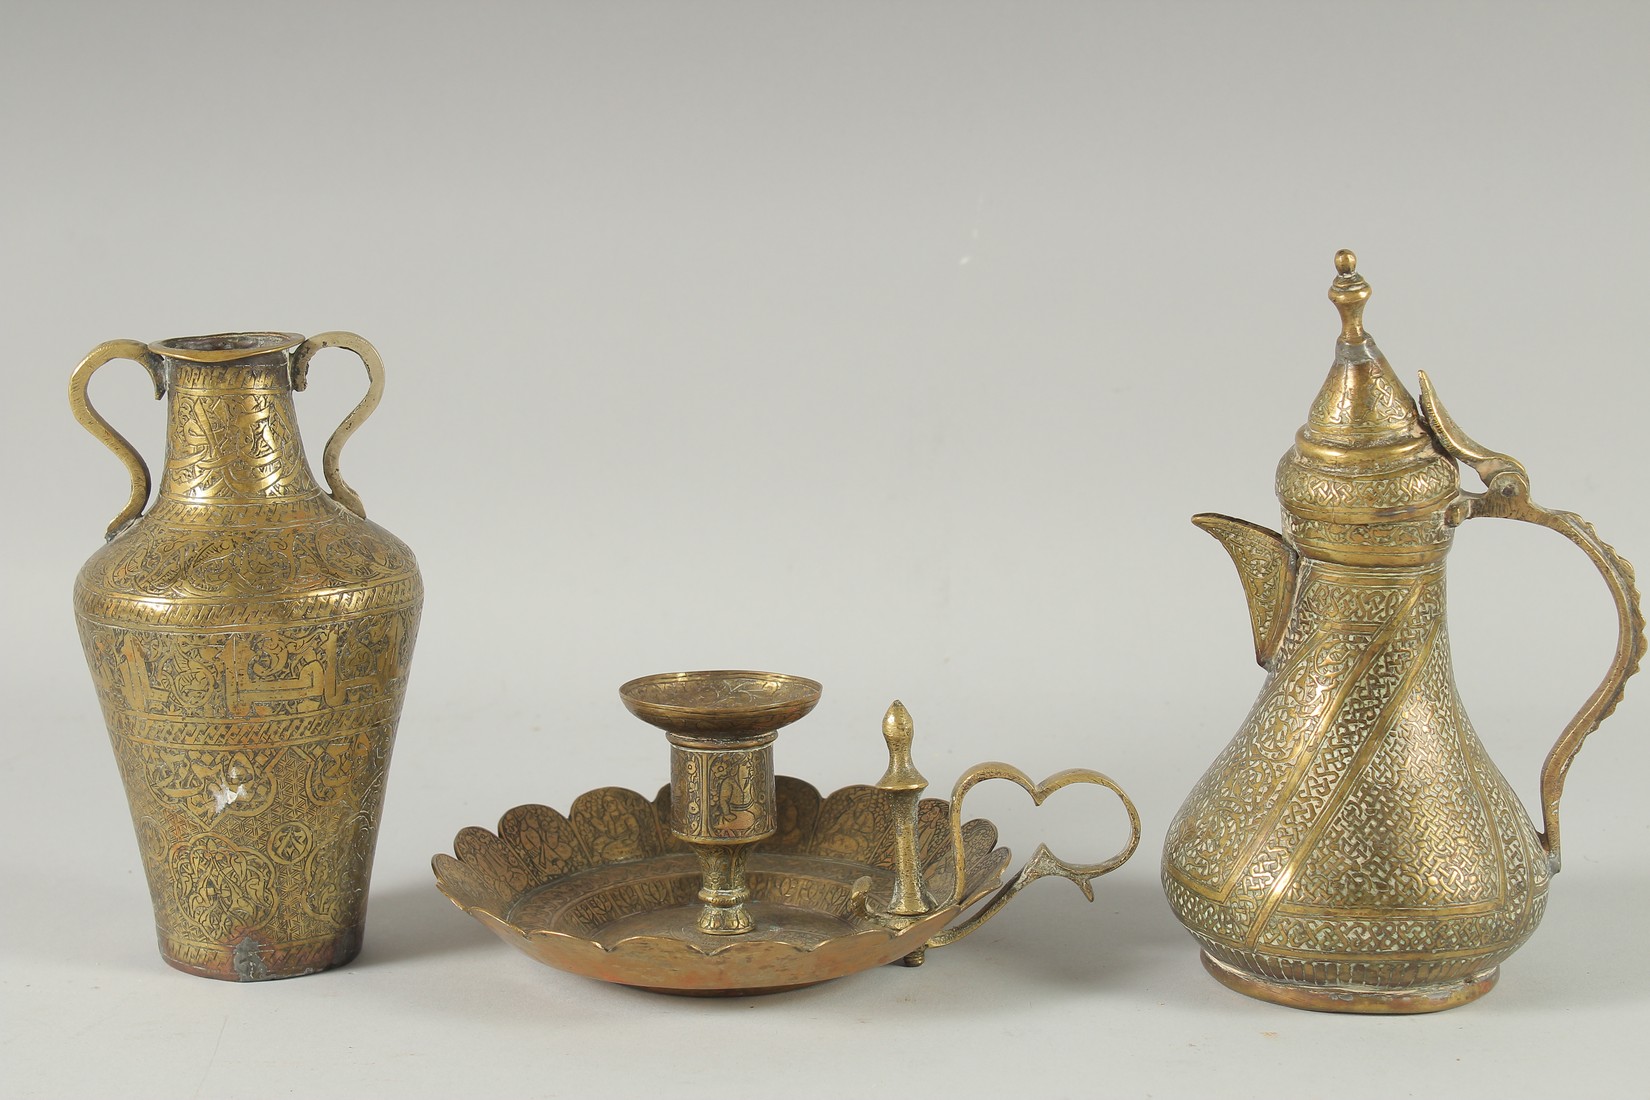 THREE 19TH CENTURY IRANIAN ENGRAVED BRASS PIECES; comprising a twin handle vase / vessel with - Image 5 of 8